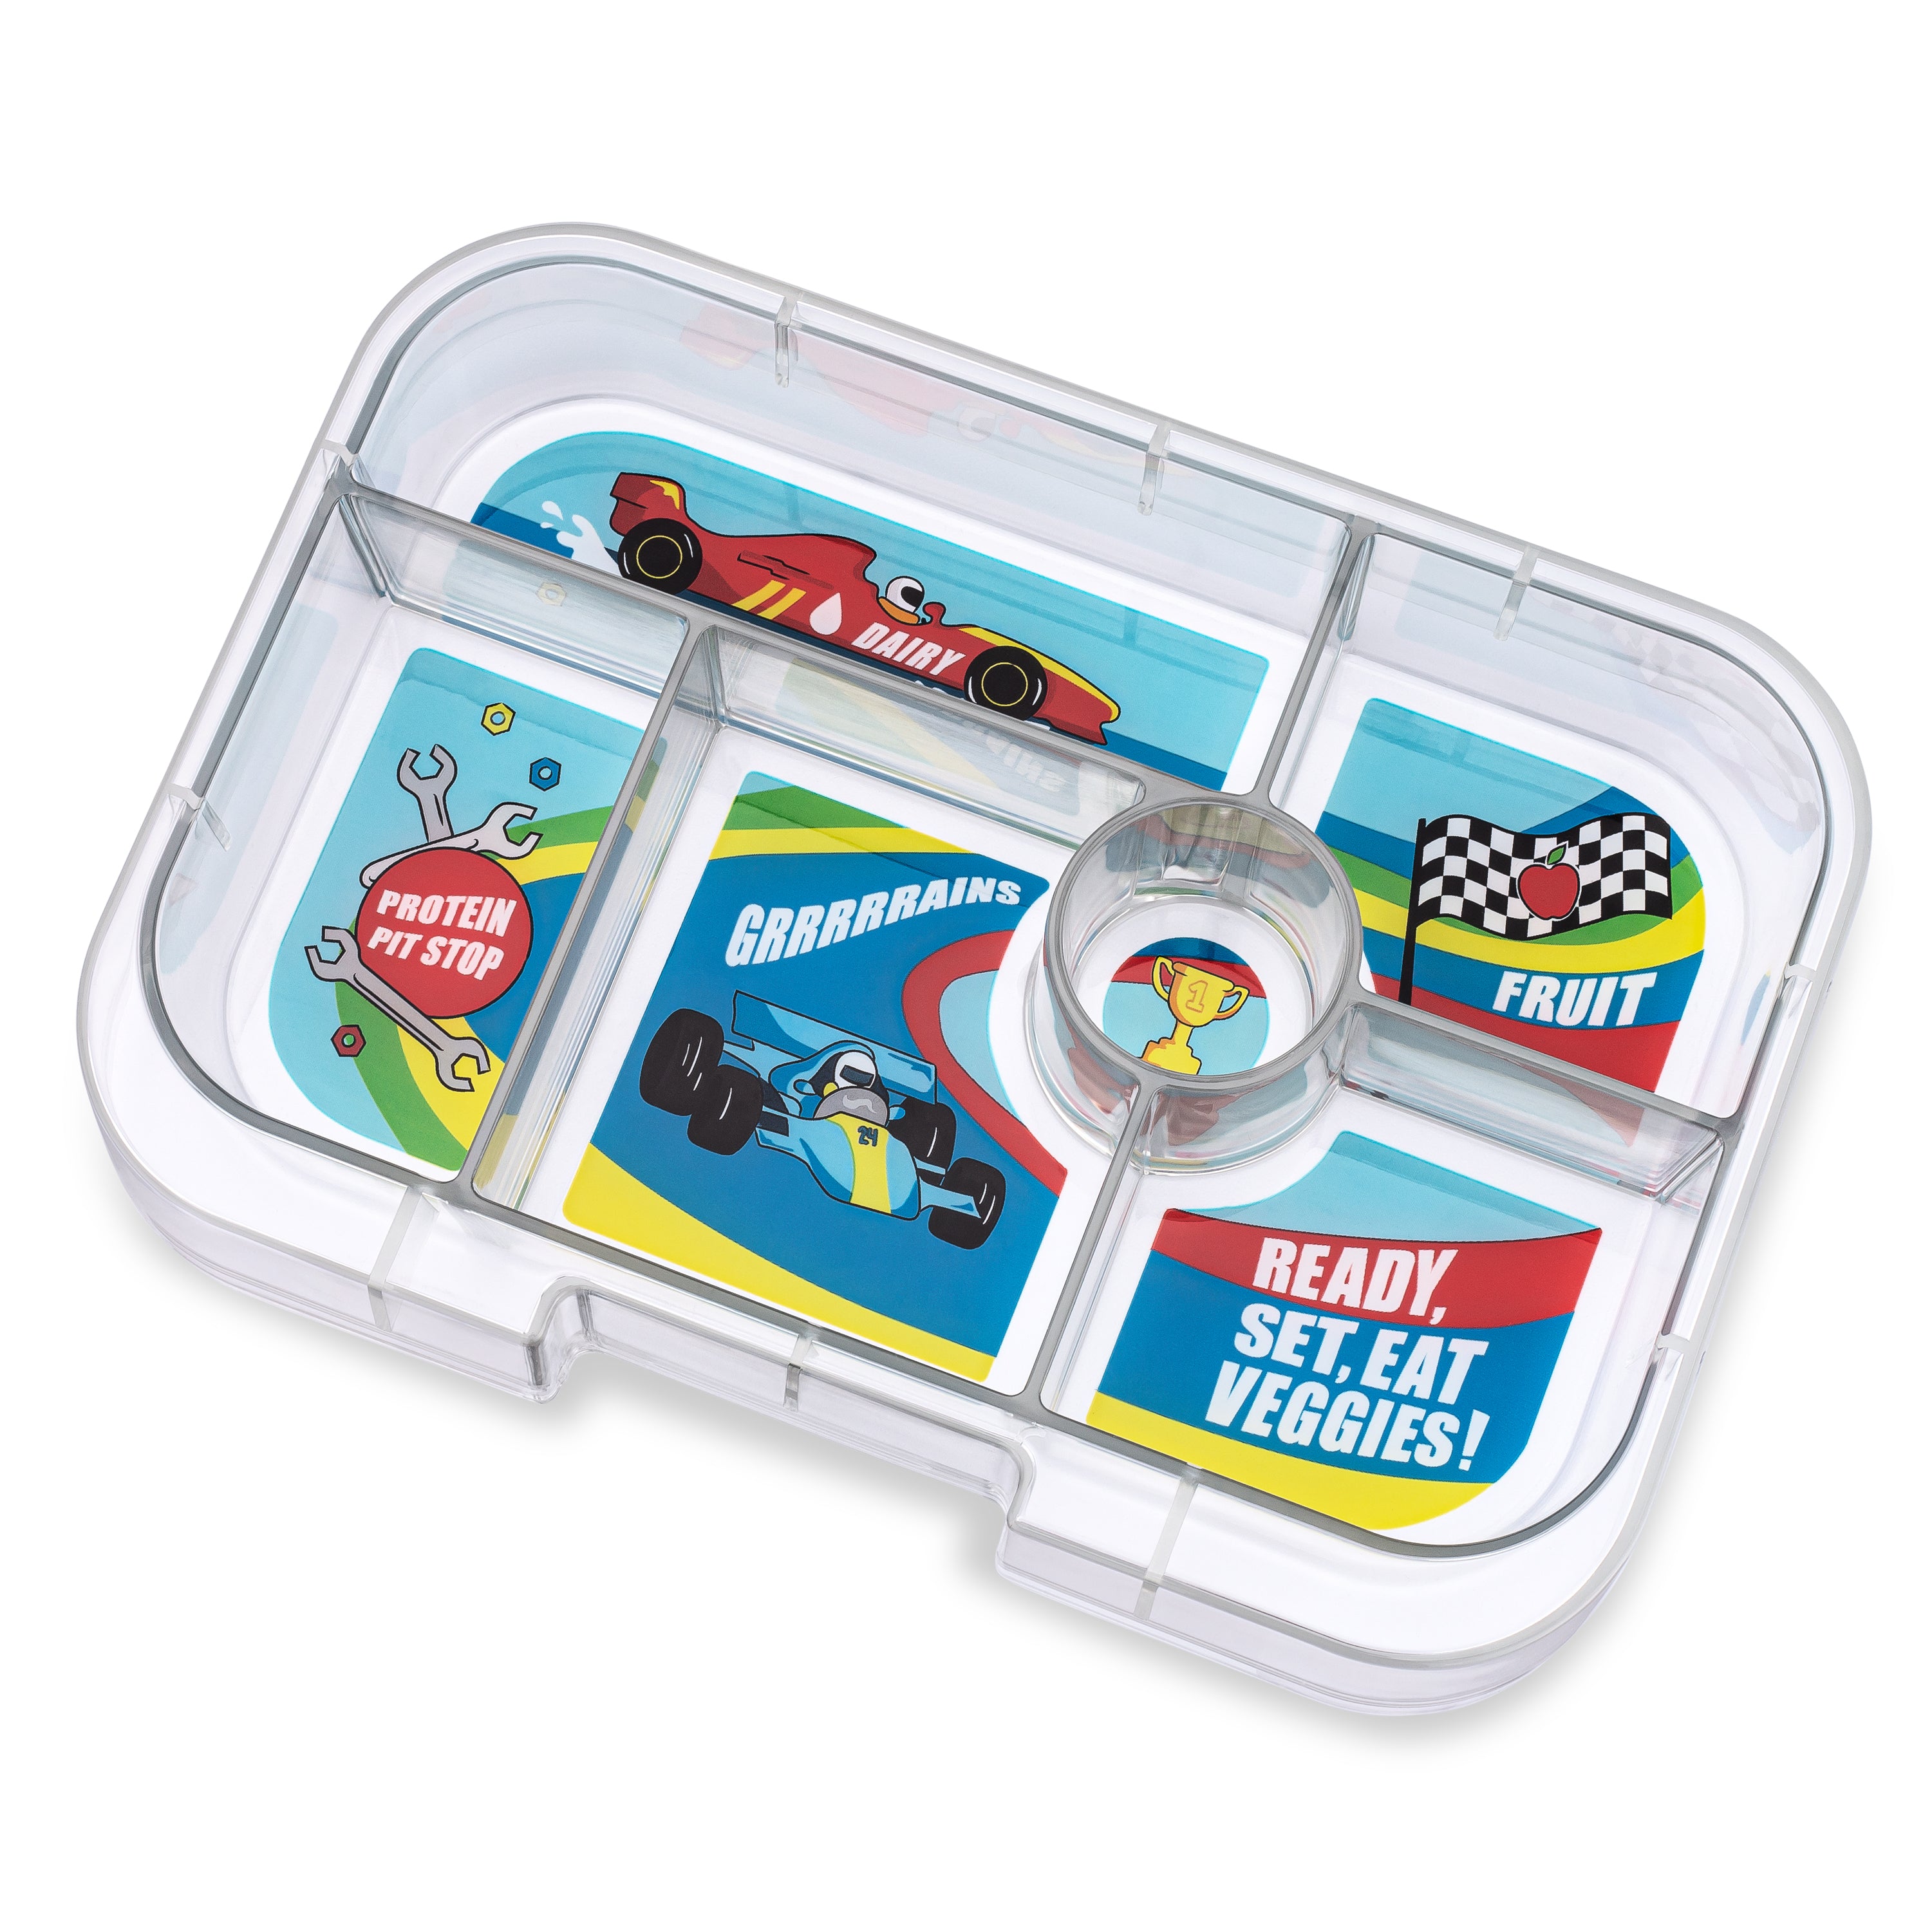 Leakproof Bento Box for Kids - Yumbox Original Roar Red with Race Cars Tray